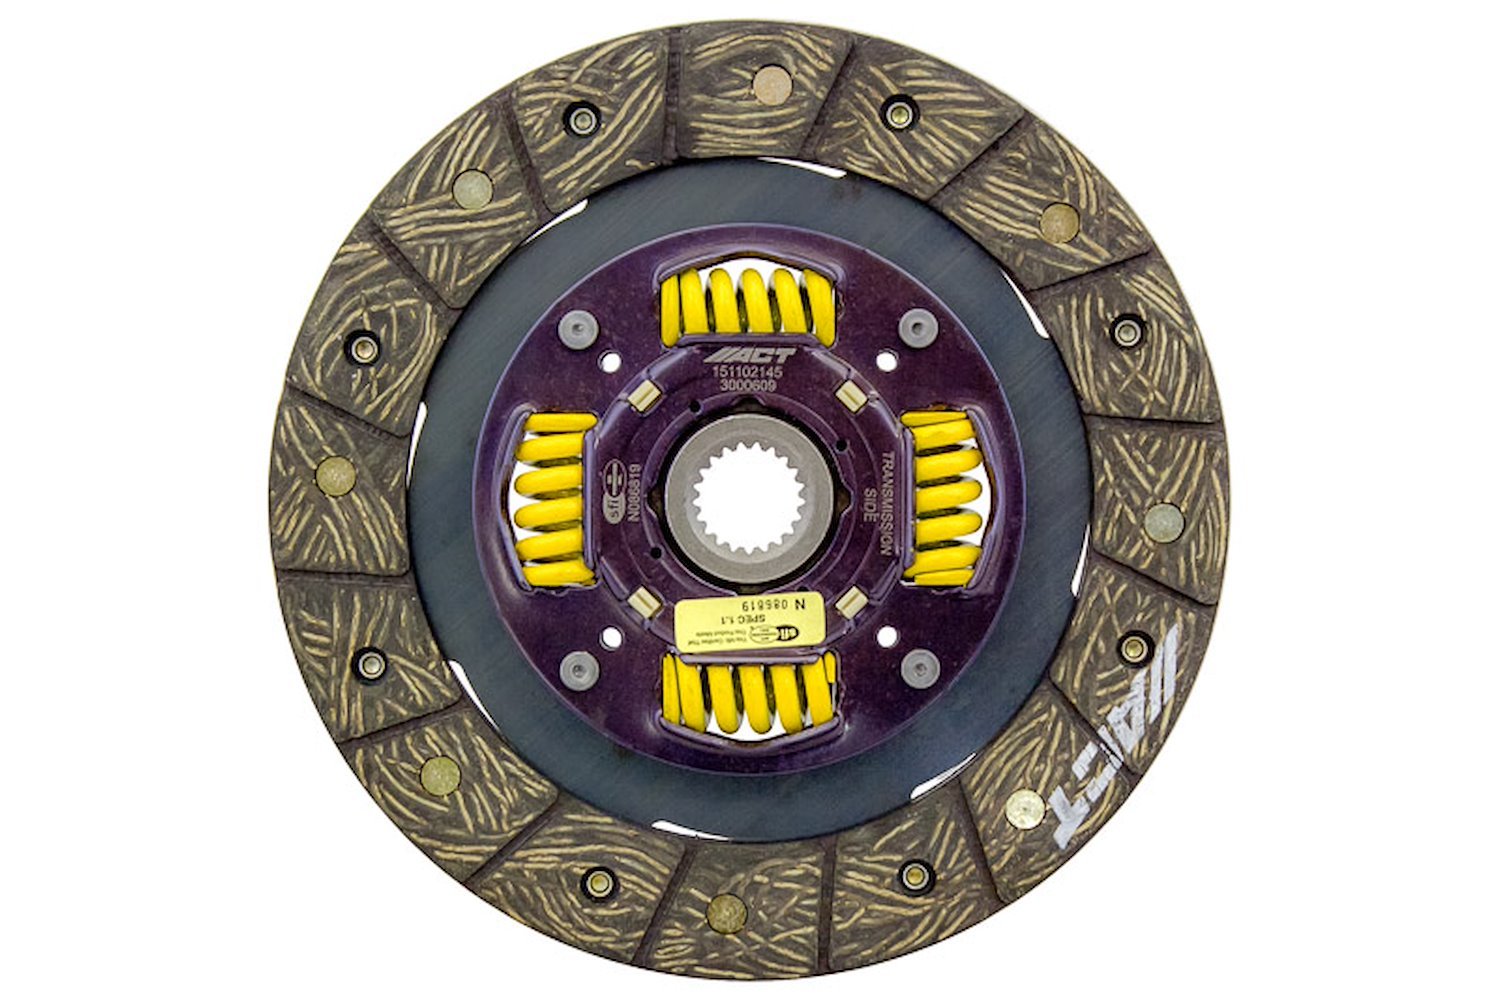 Performance Street Sprung Disc Transmission Clutch Friction Plate Fits Select Multiple Makes/Models